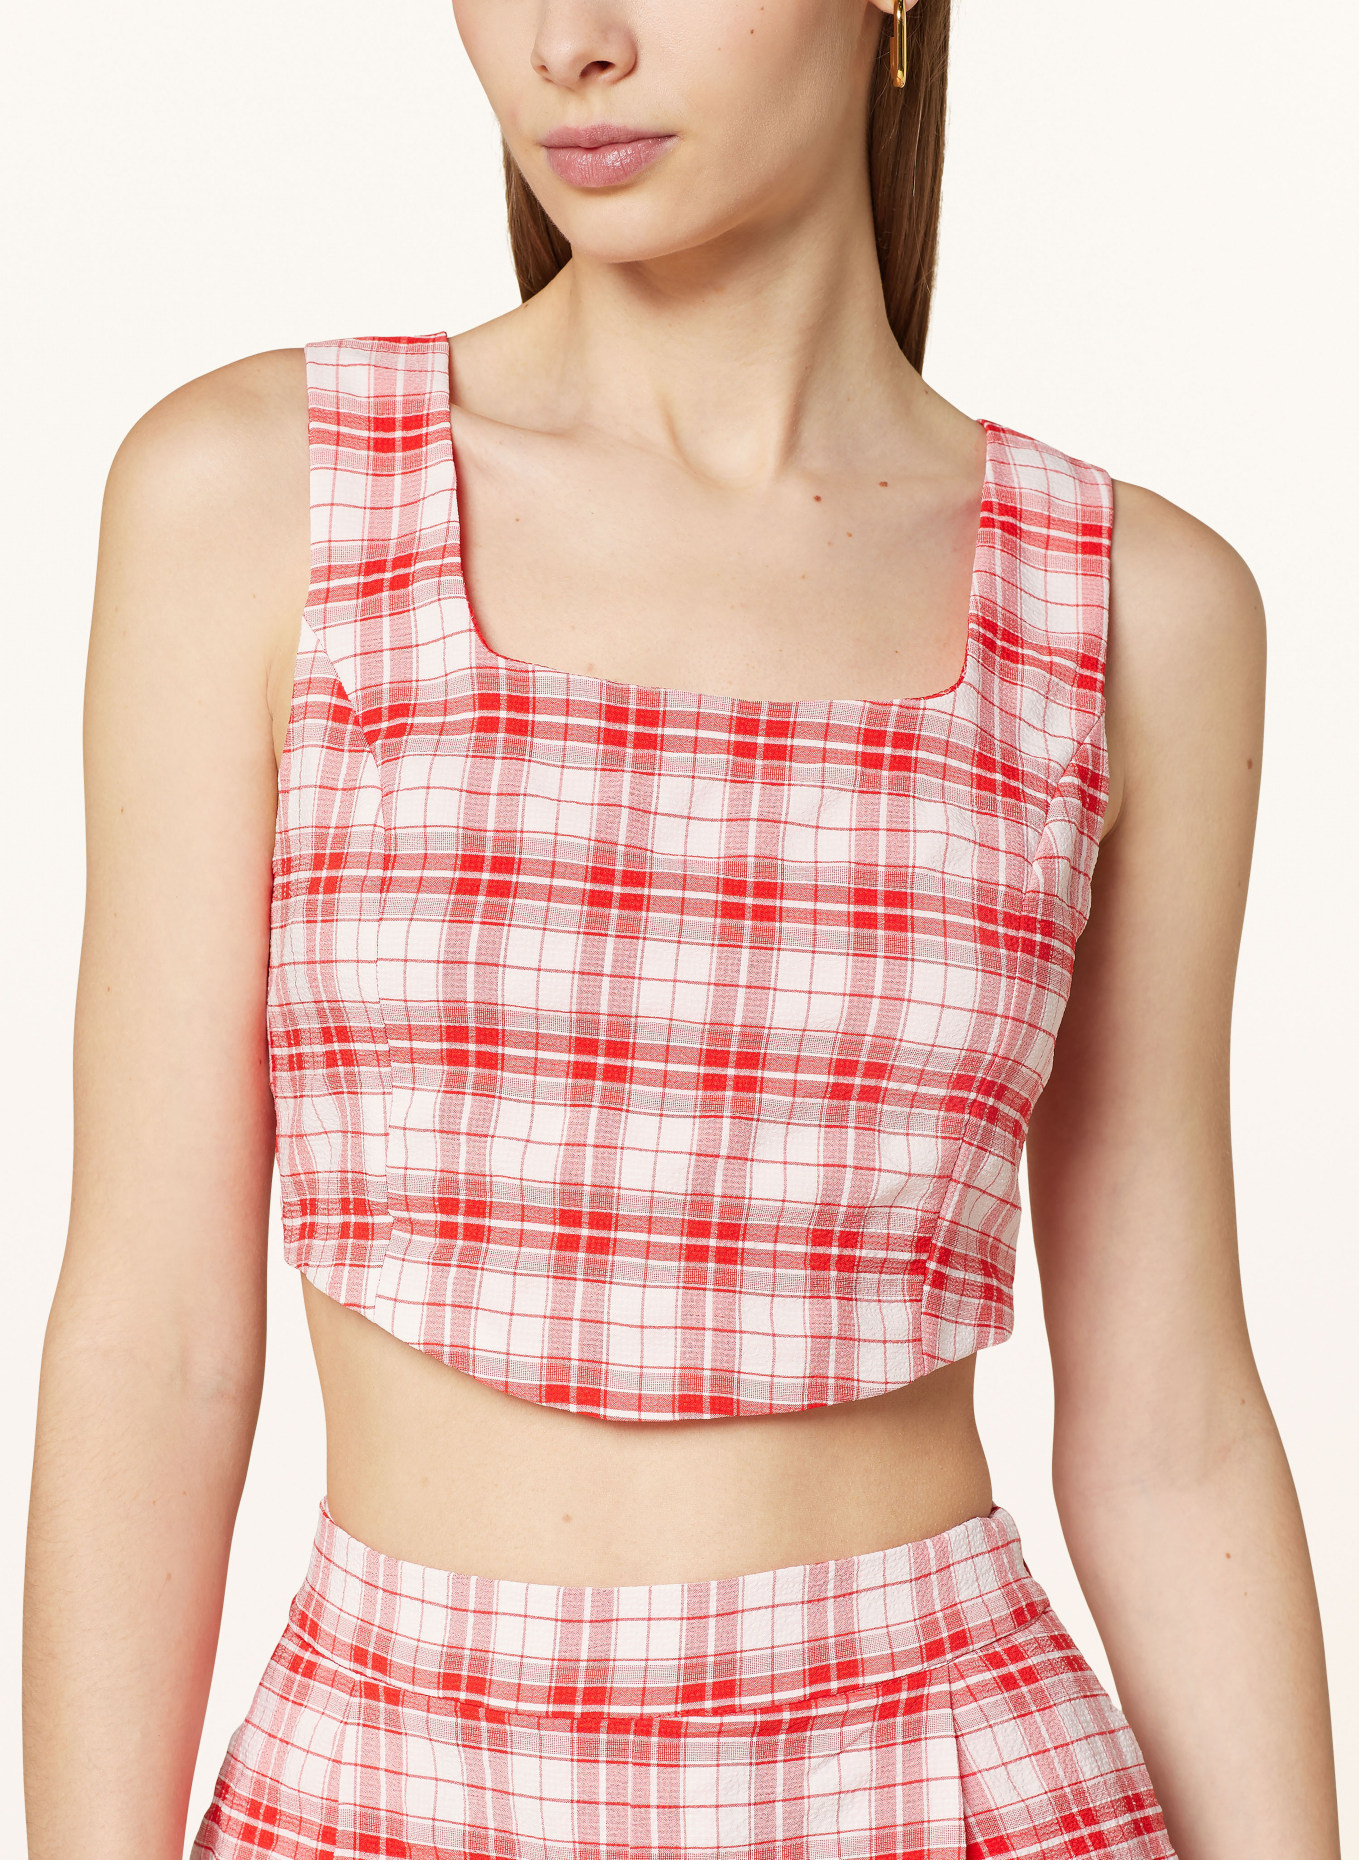 SOMETHINGNEW Cropped-Top SNCHLOE, Farbe: ROT/ WEISS (Bild 4)